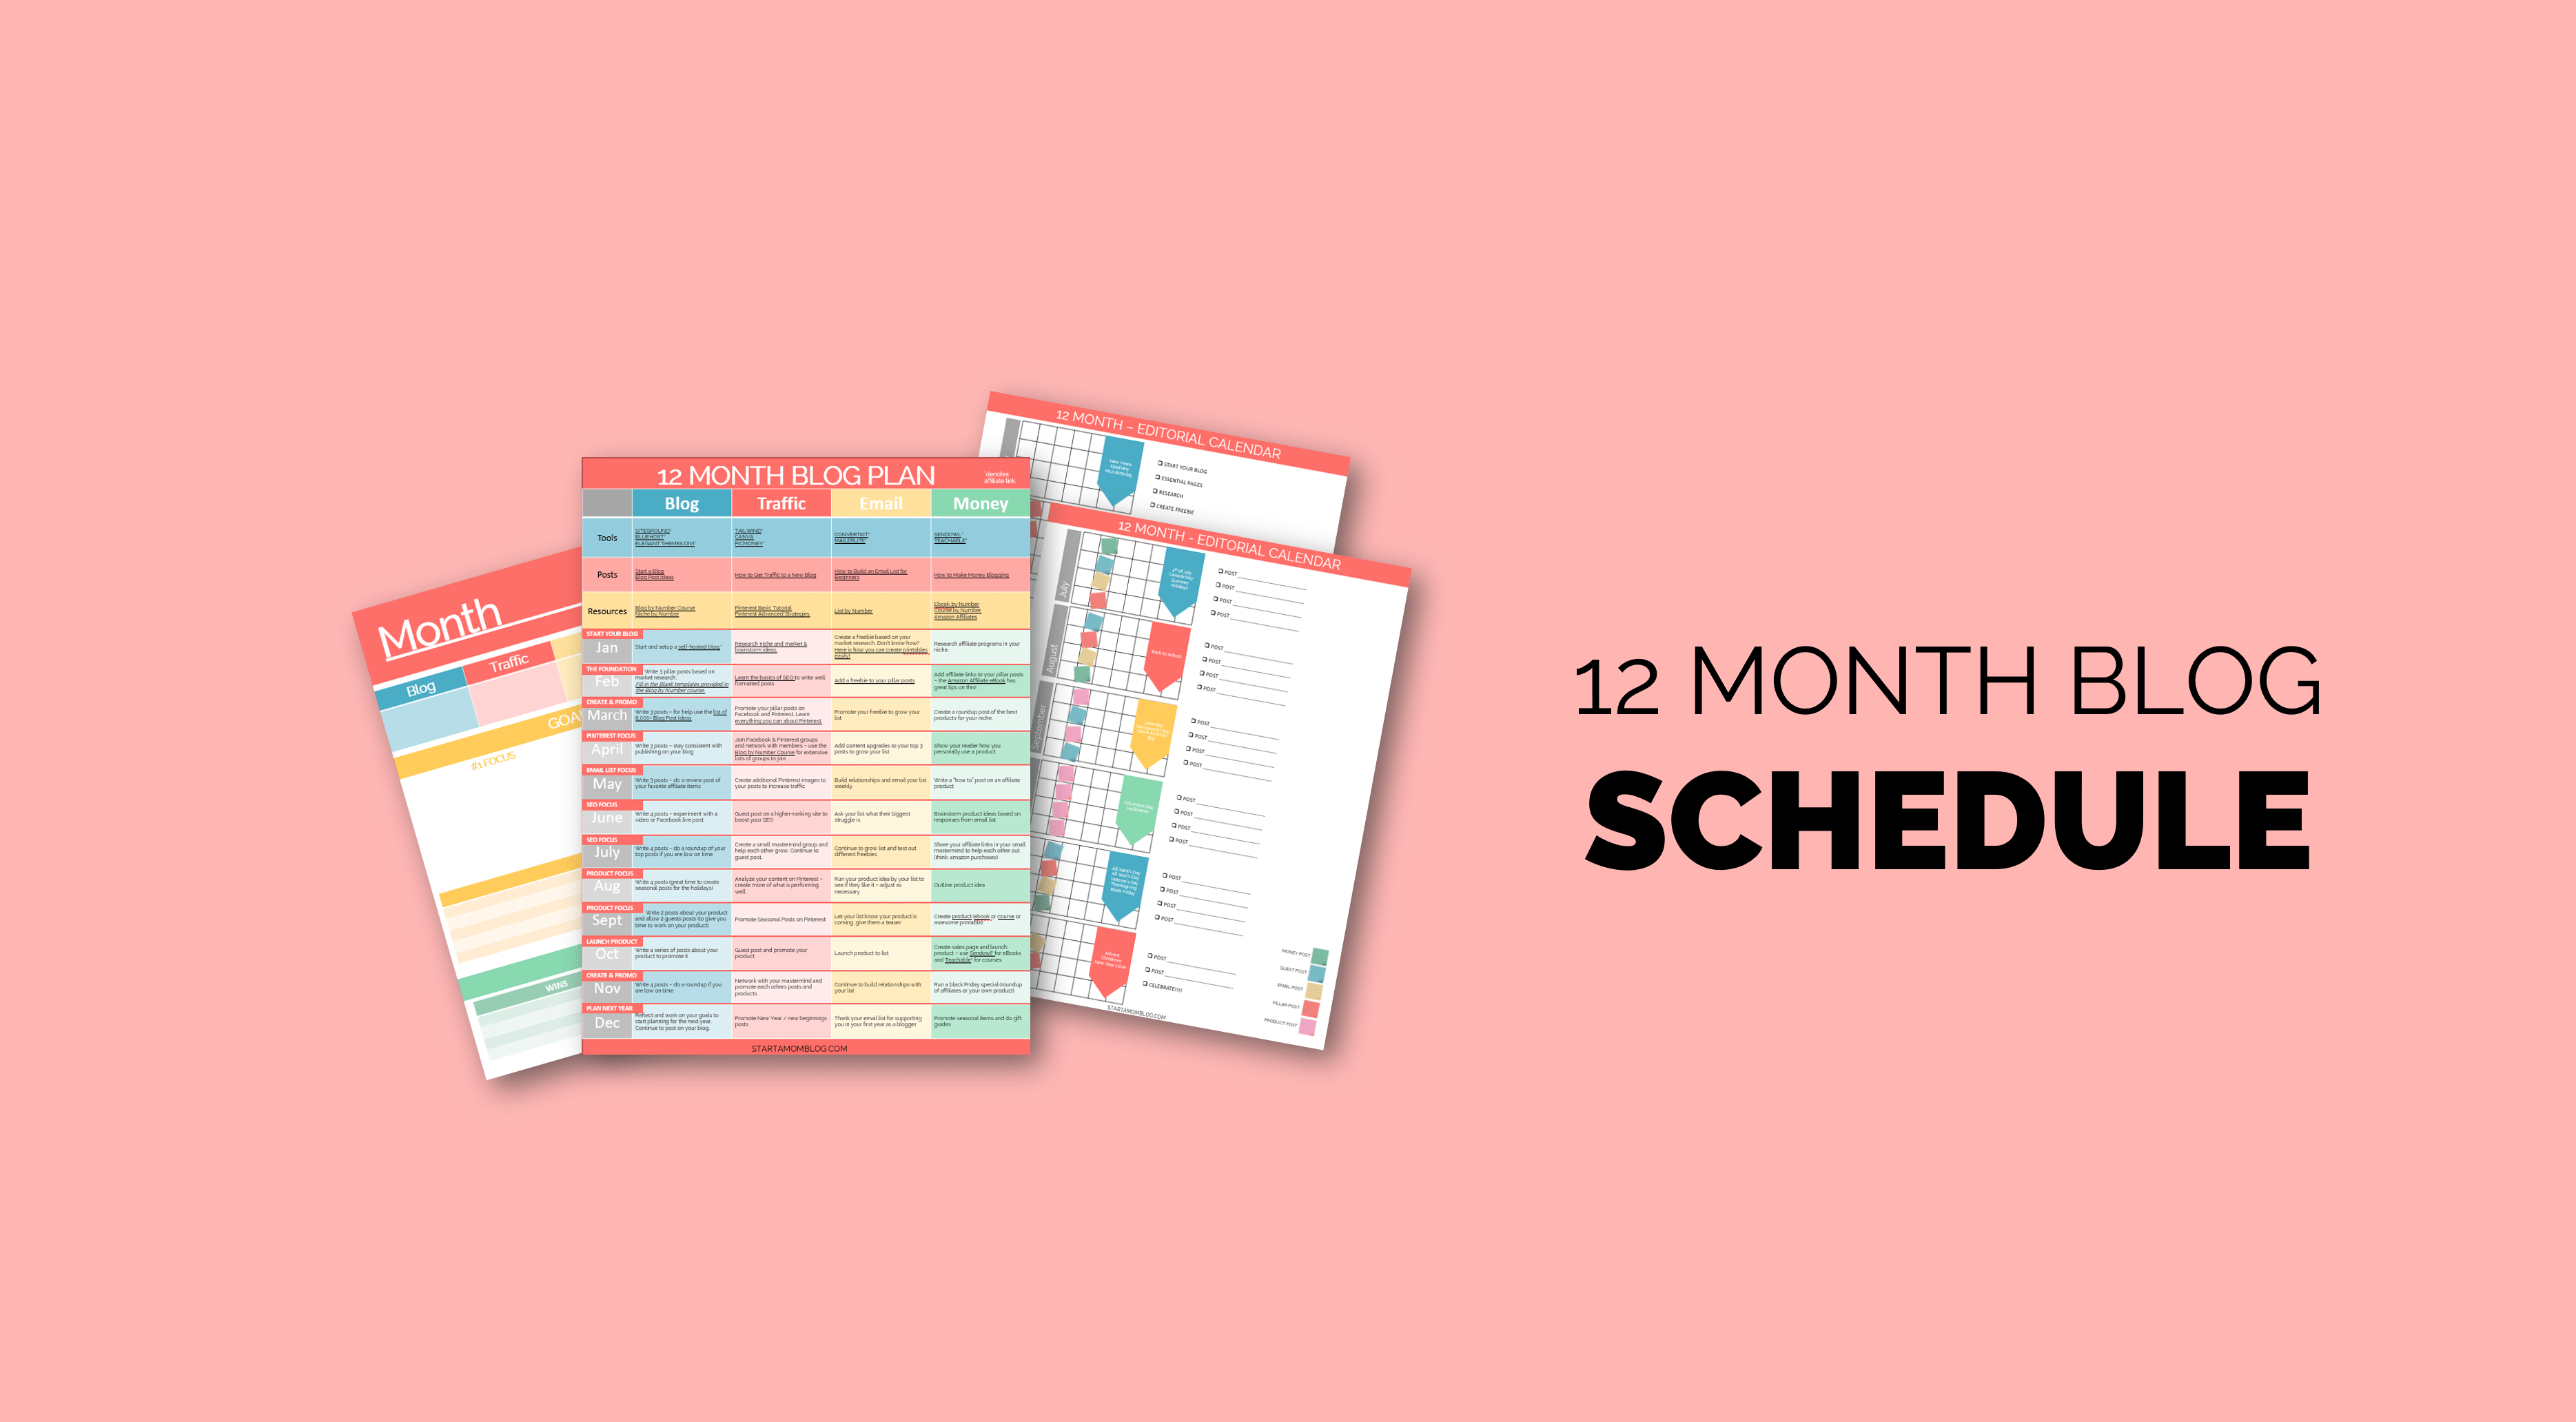 Blog Plan Schedule Template – Monthly Goals to a Full Time Income